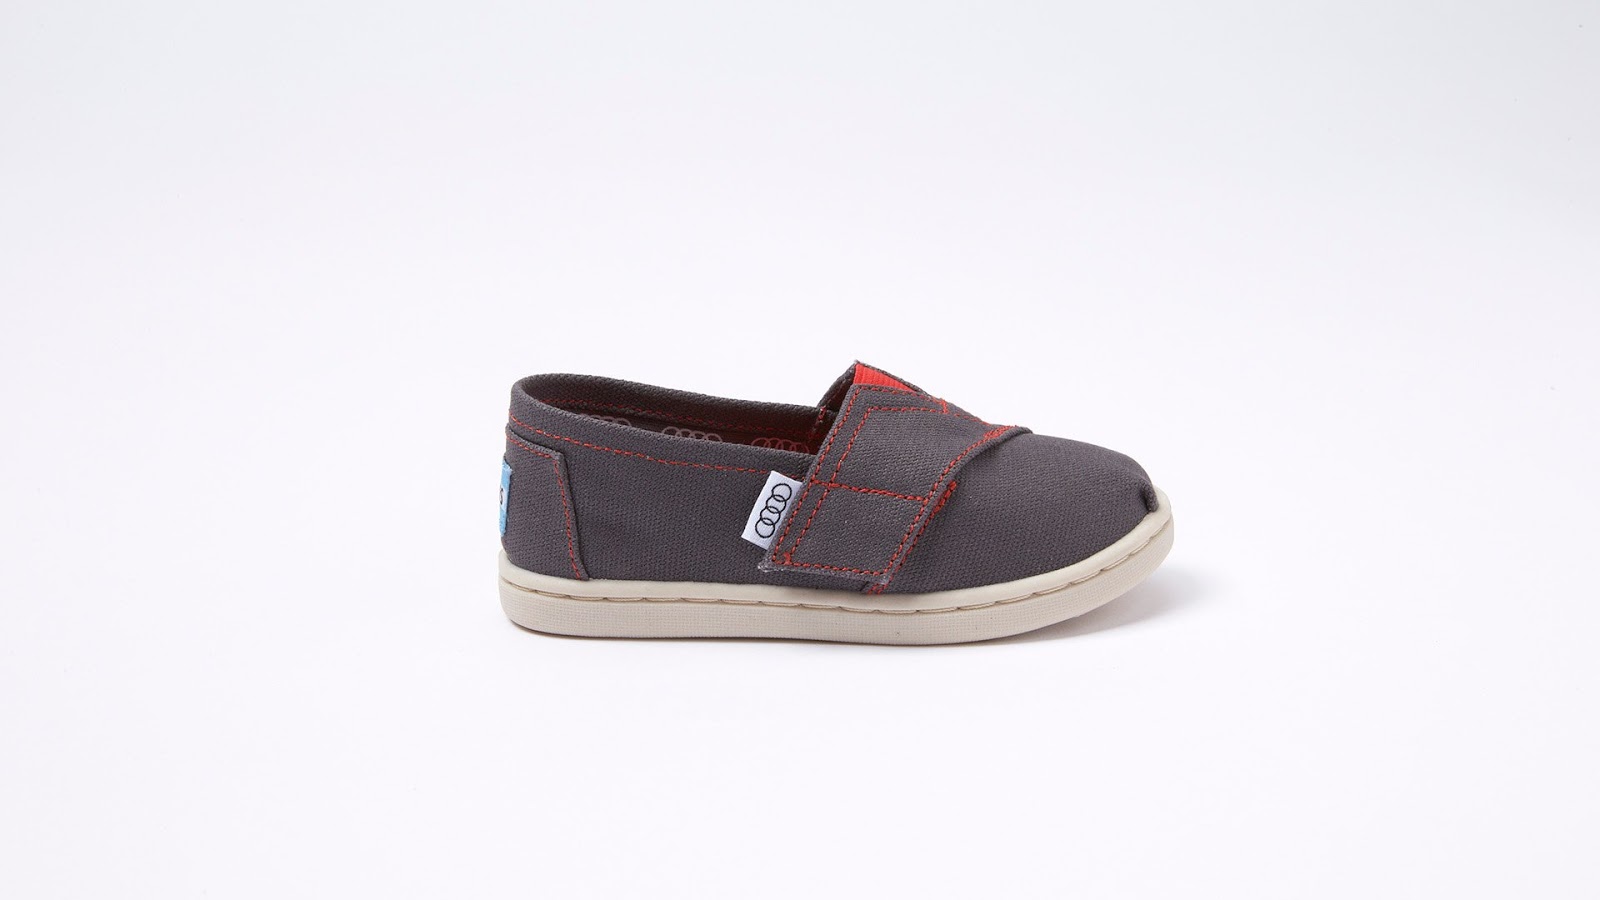 Audi designed a line of shoes with Toms, but you need to buy an Audi to get  them - The Verge